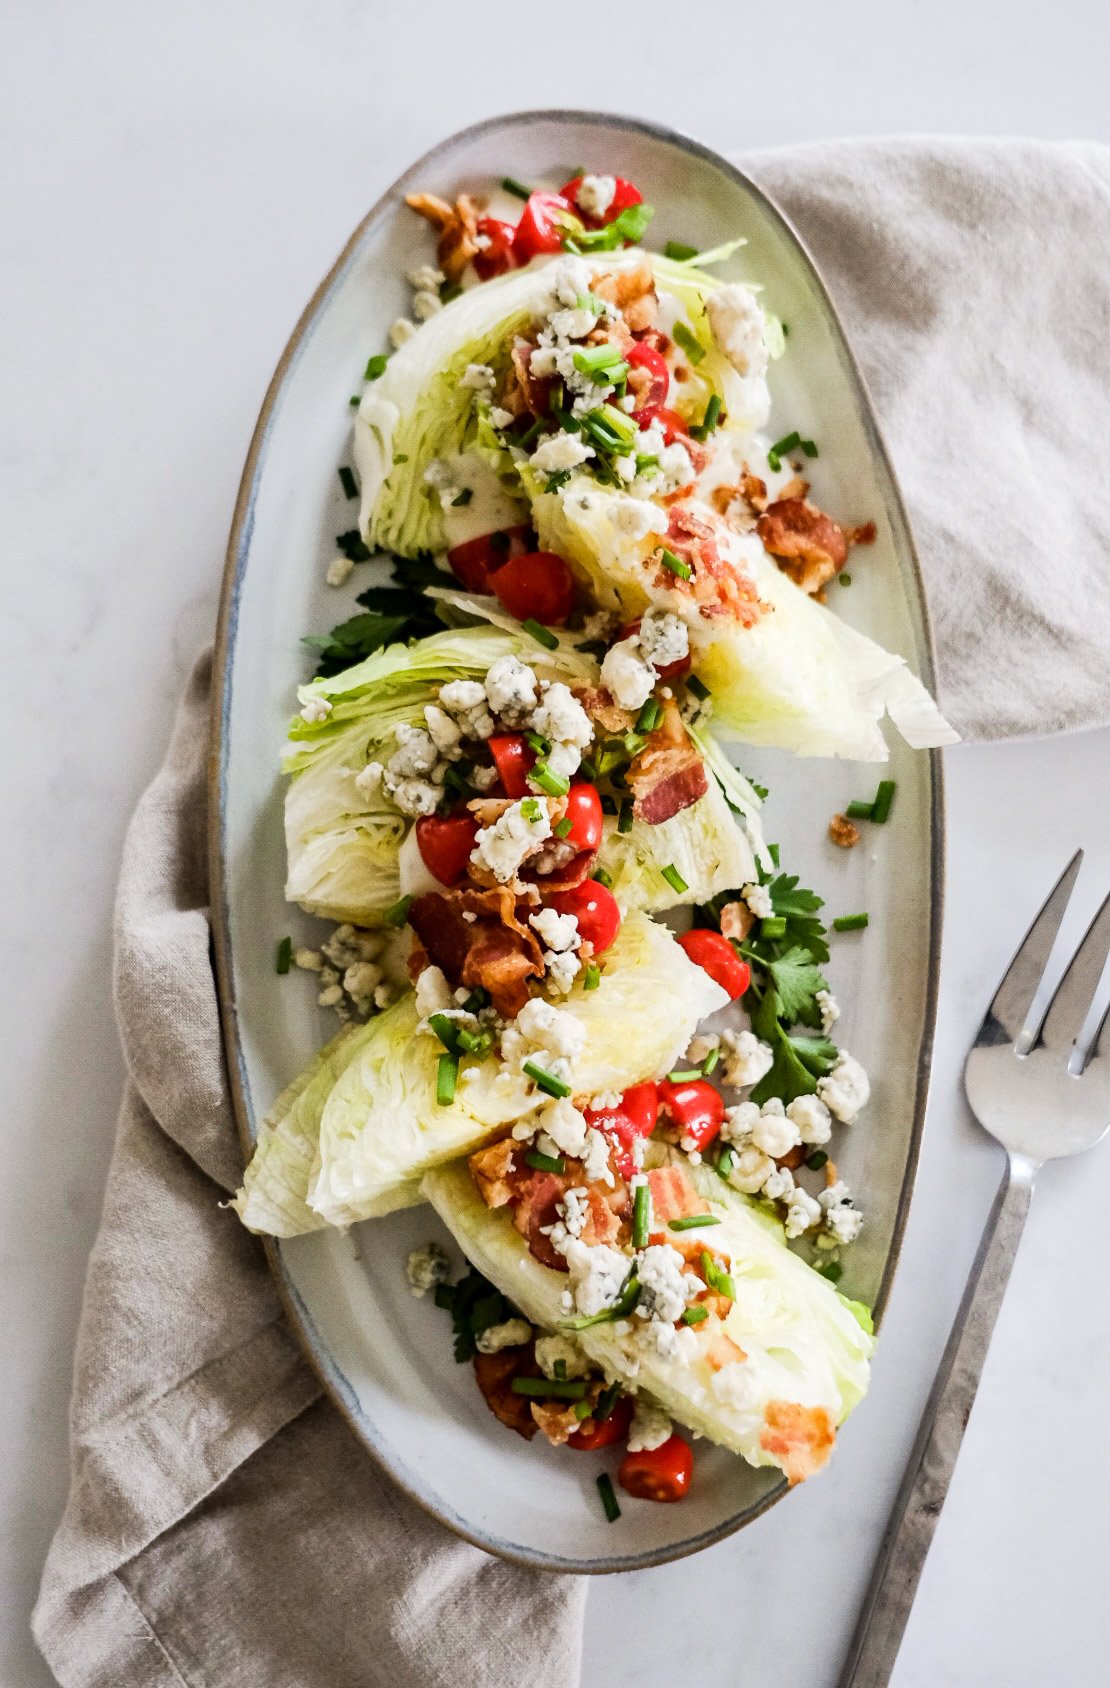 Classic Wedge Salad with Ranch Dressing placed on a white oval dish with serving fork